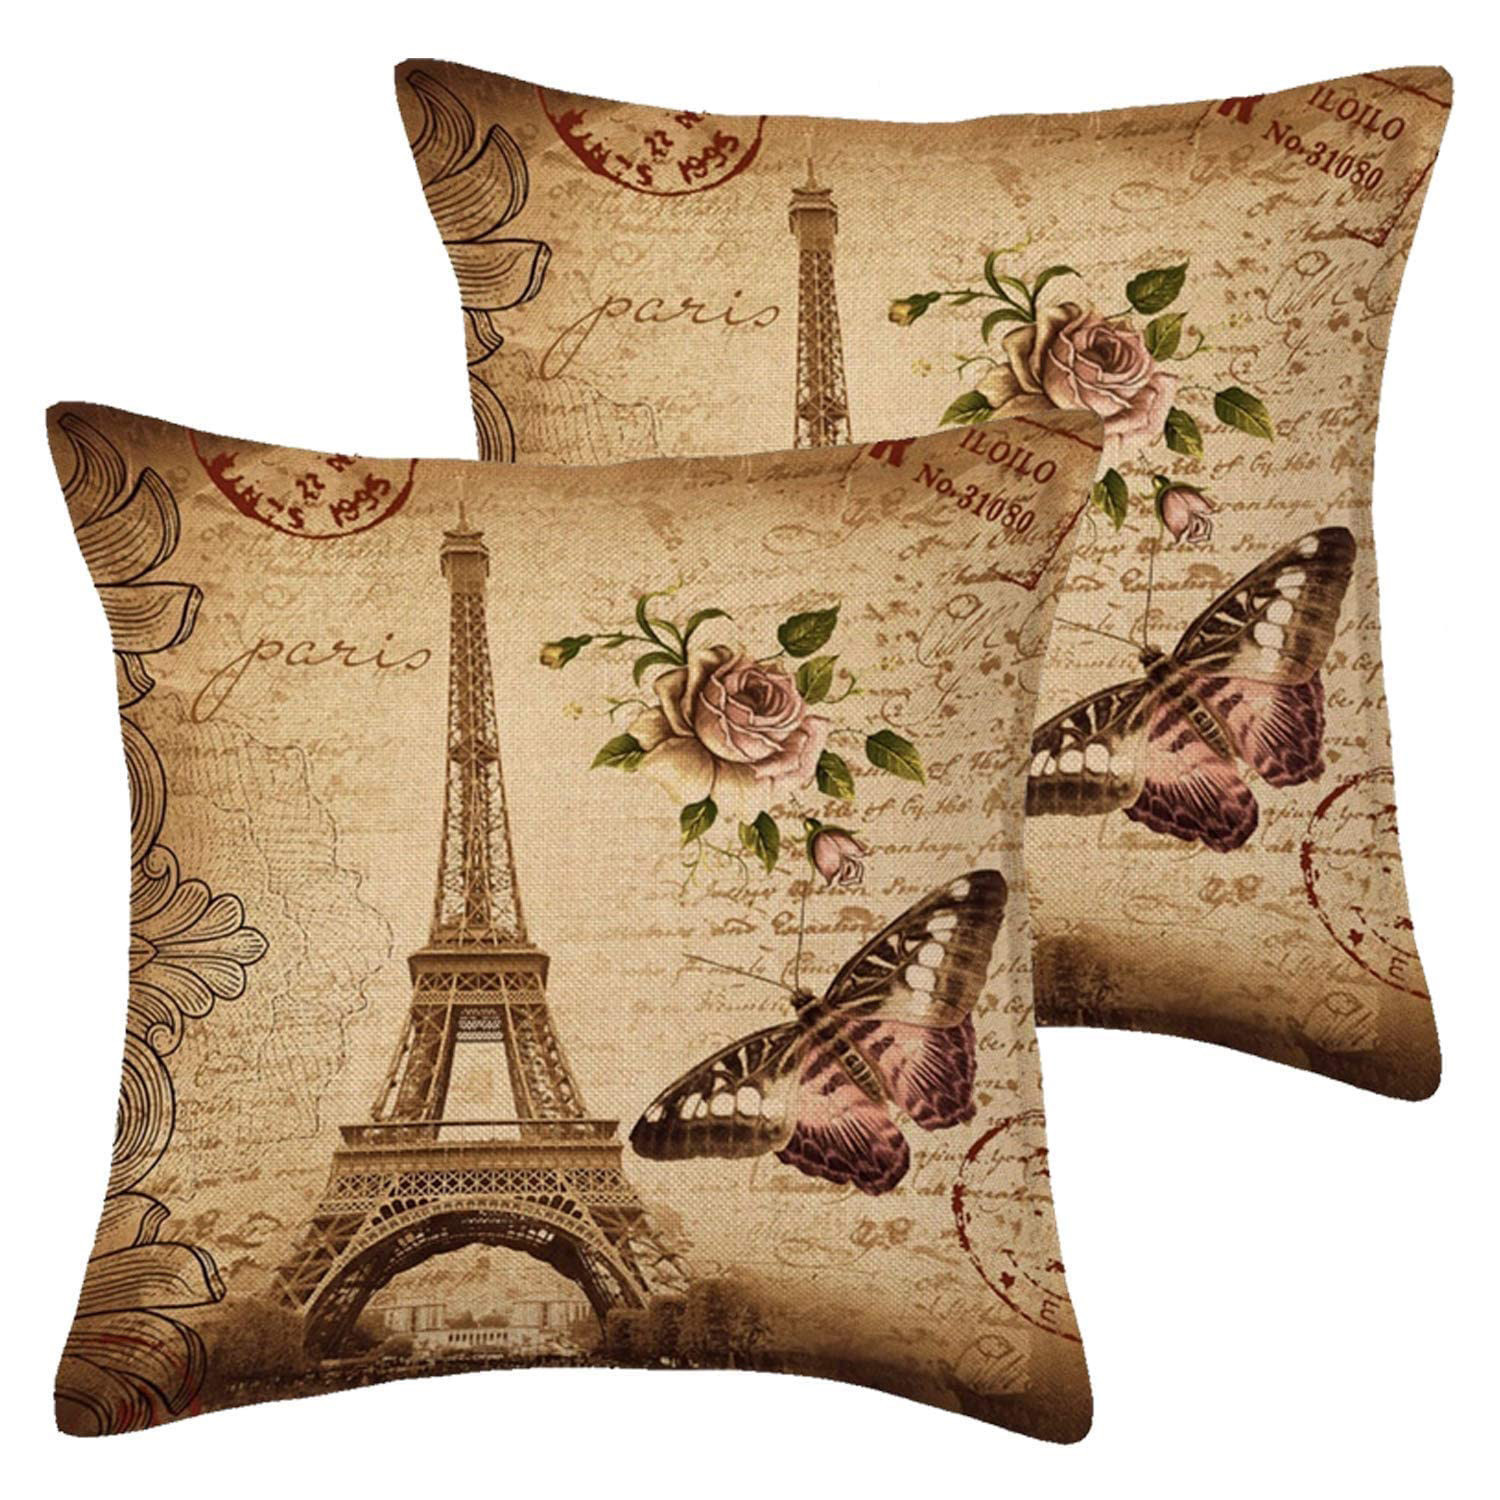 Kuber Industries Cushion Cover|Ractangle Cushion Covers|Sofa Cushion Covers|Cushion Covers 16 inch x 16 inch|Cushion Cover Set of 5 (Brown)